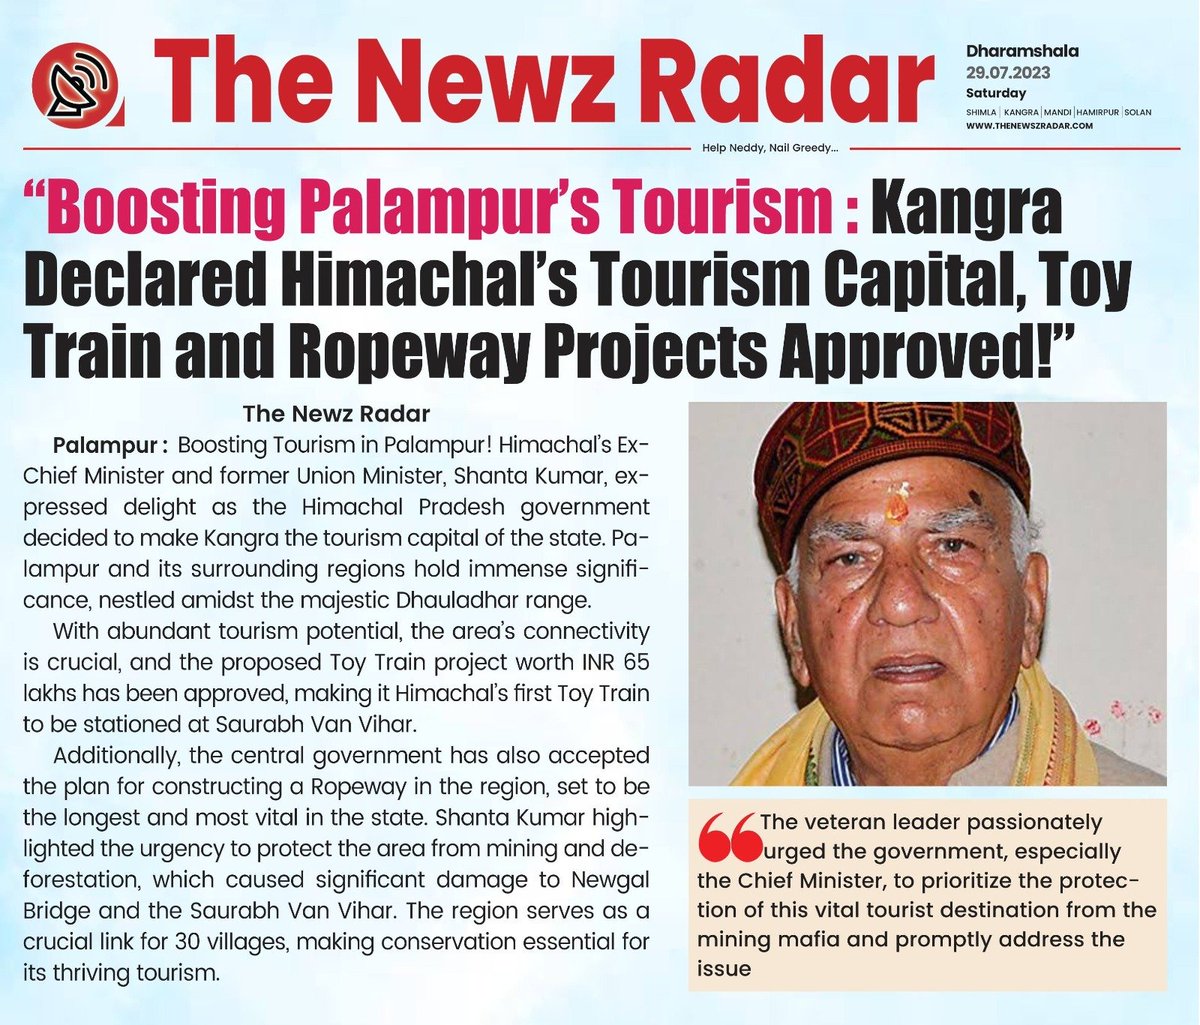 💥“Boosting Palampur’s Tourism: Kangra Declared Himachal’s Tourism Capital, Toy Train and Ropeway Projects Approved!” 🏞️🚂🚡

Read Full Article👇
thenewzradar.com/boosting-palam…